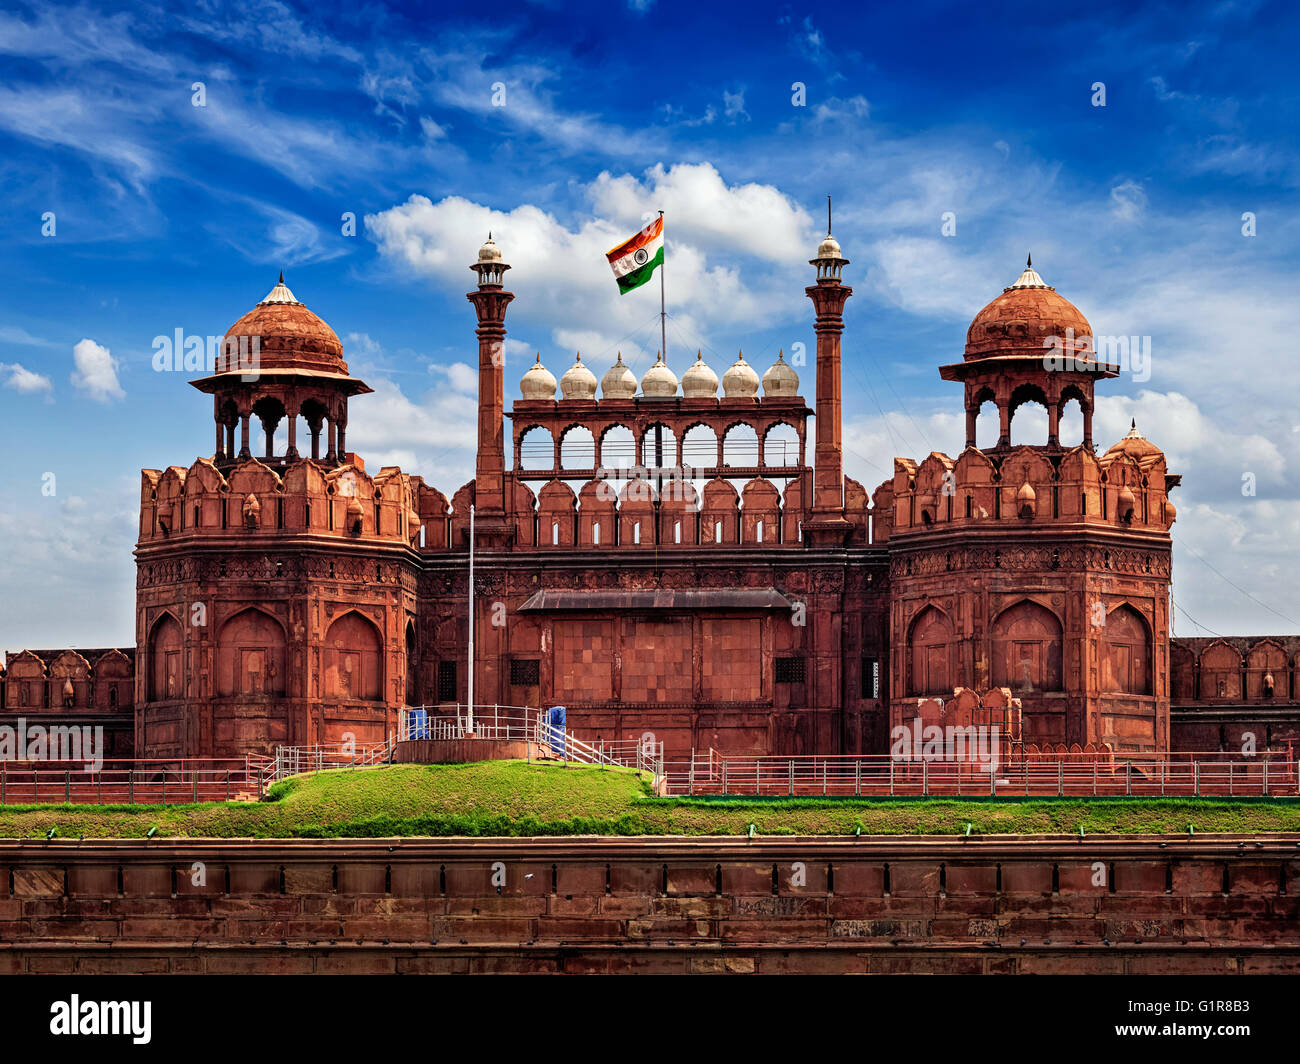 Red Fort Lal Qila with Indian flag. Delhi, India Stock Photo